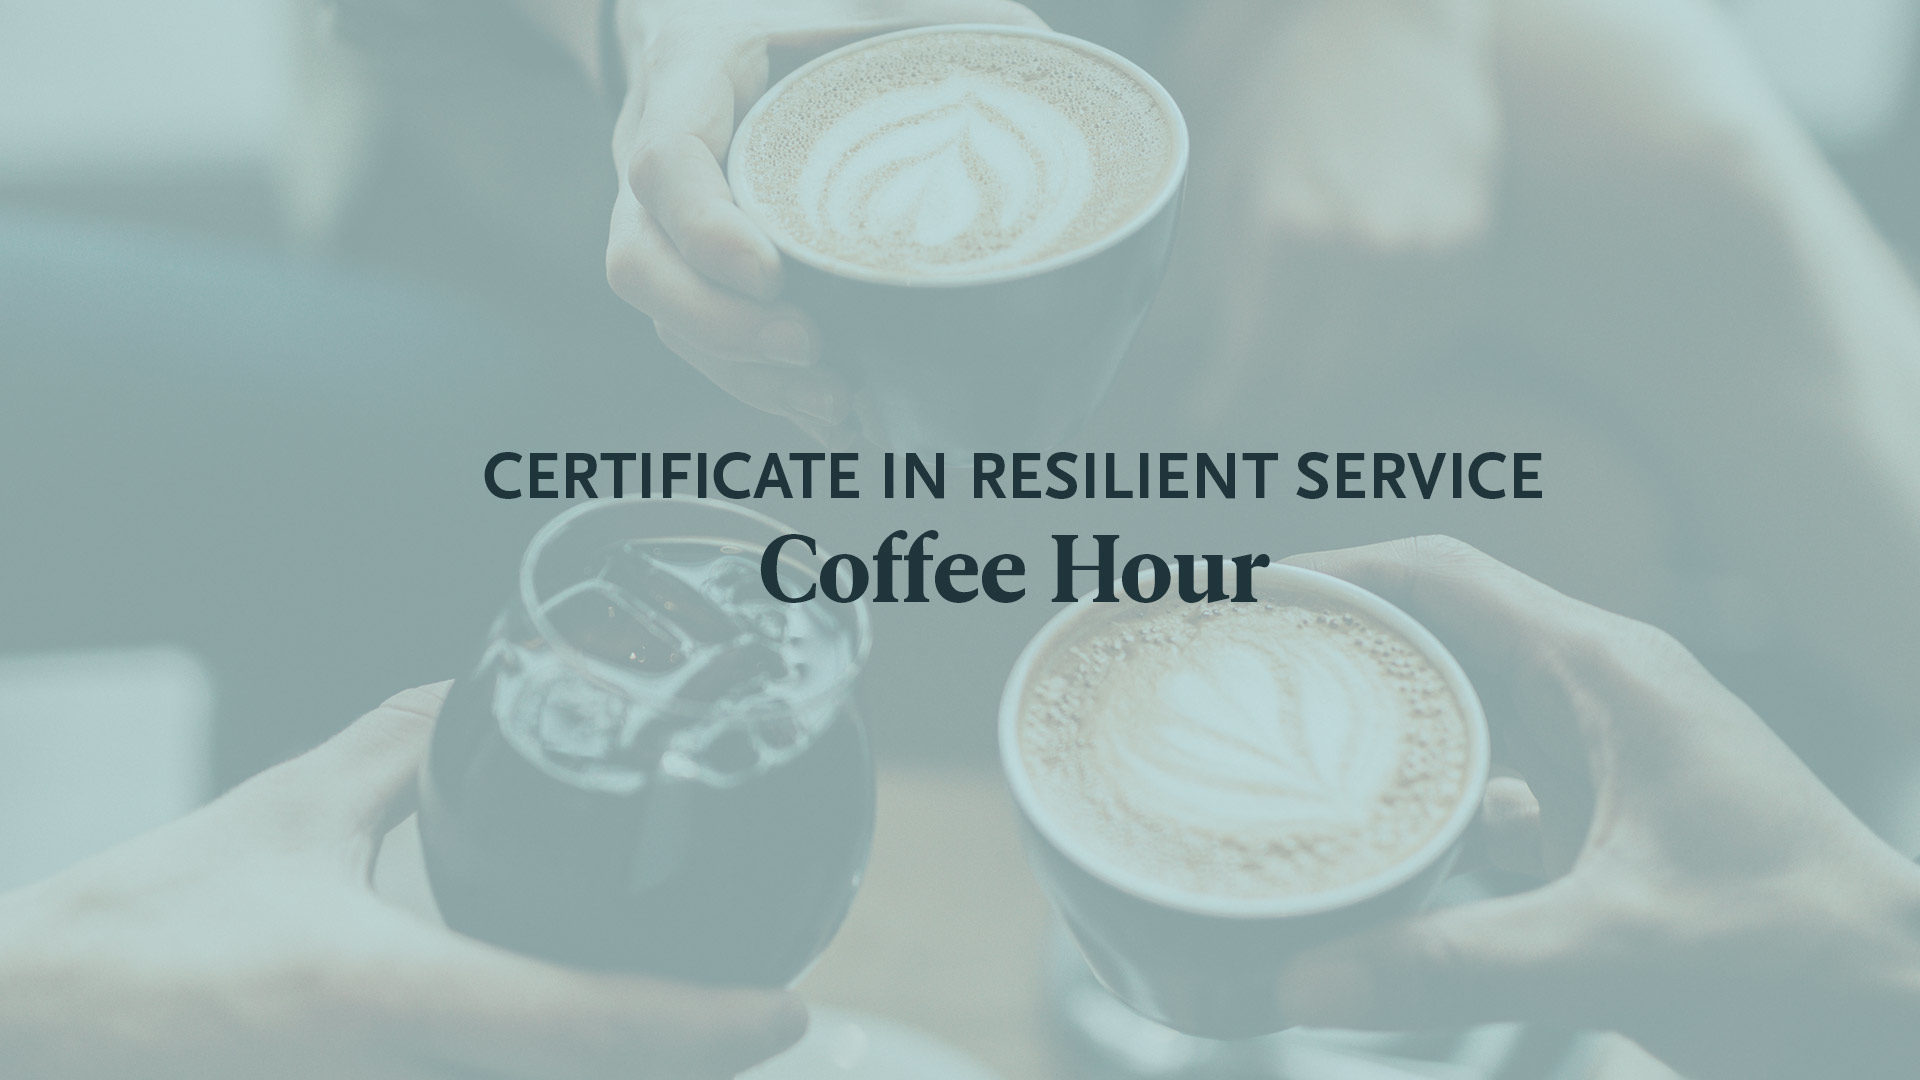 certificate in resilient service coffee hour promotion